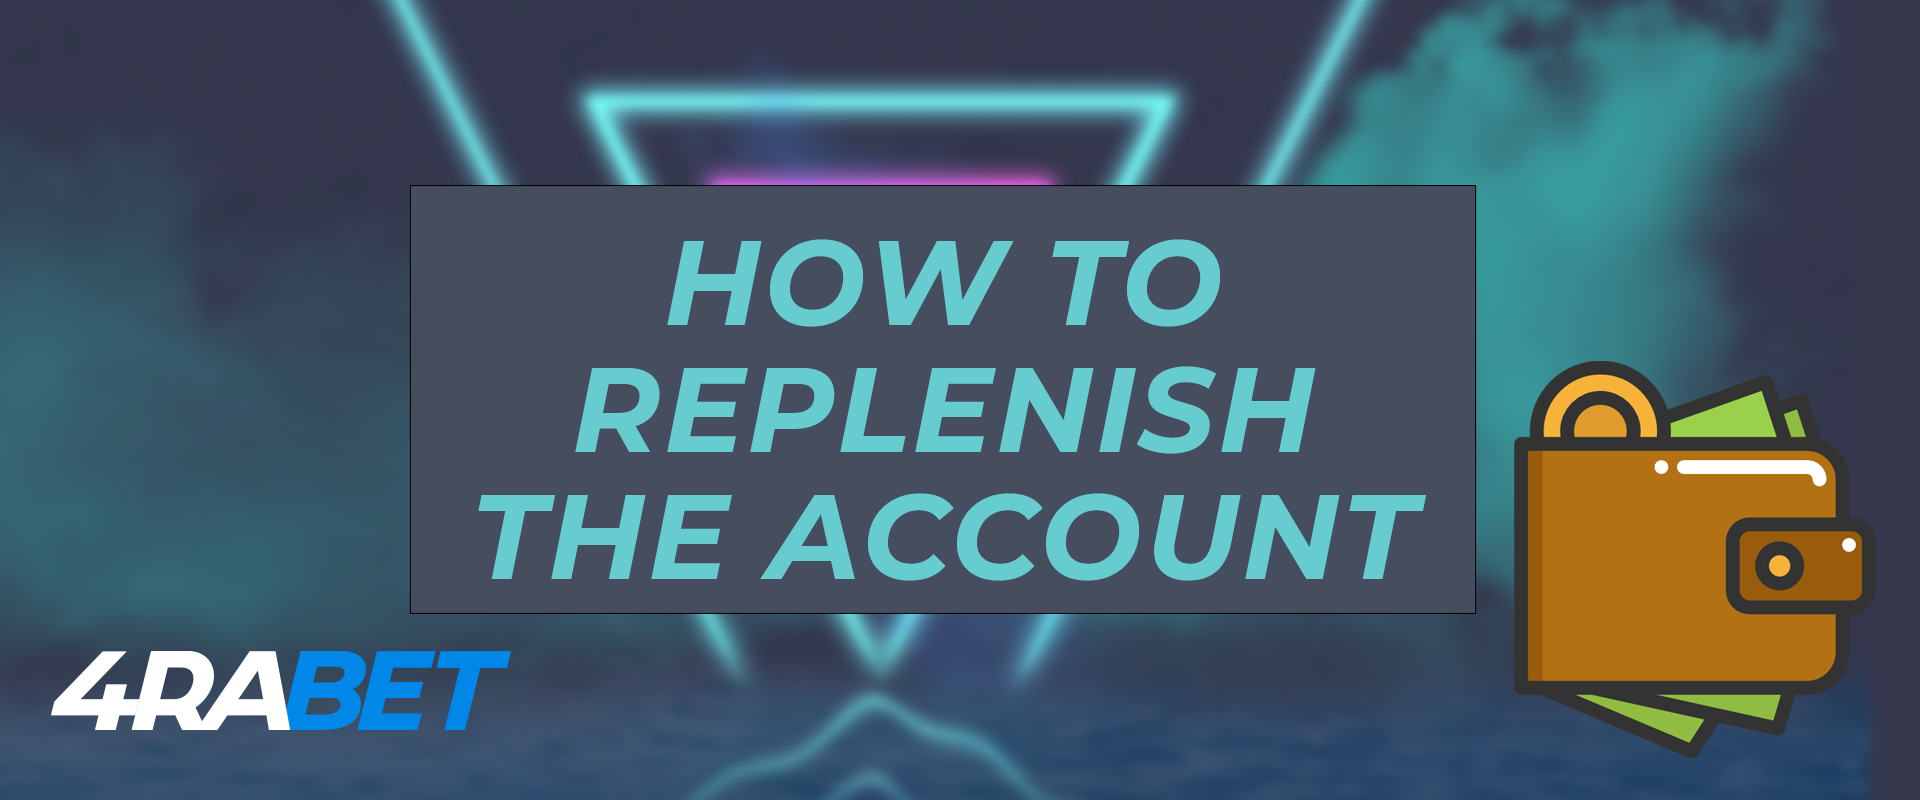 How to replenish an account on the 4rabet in order to play slots.